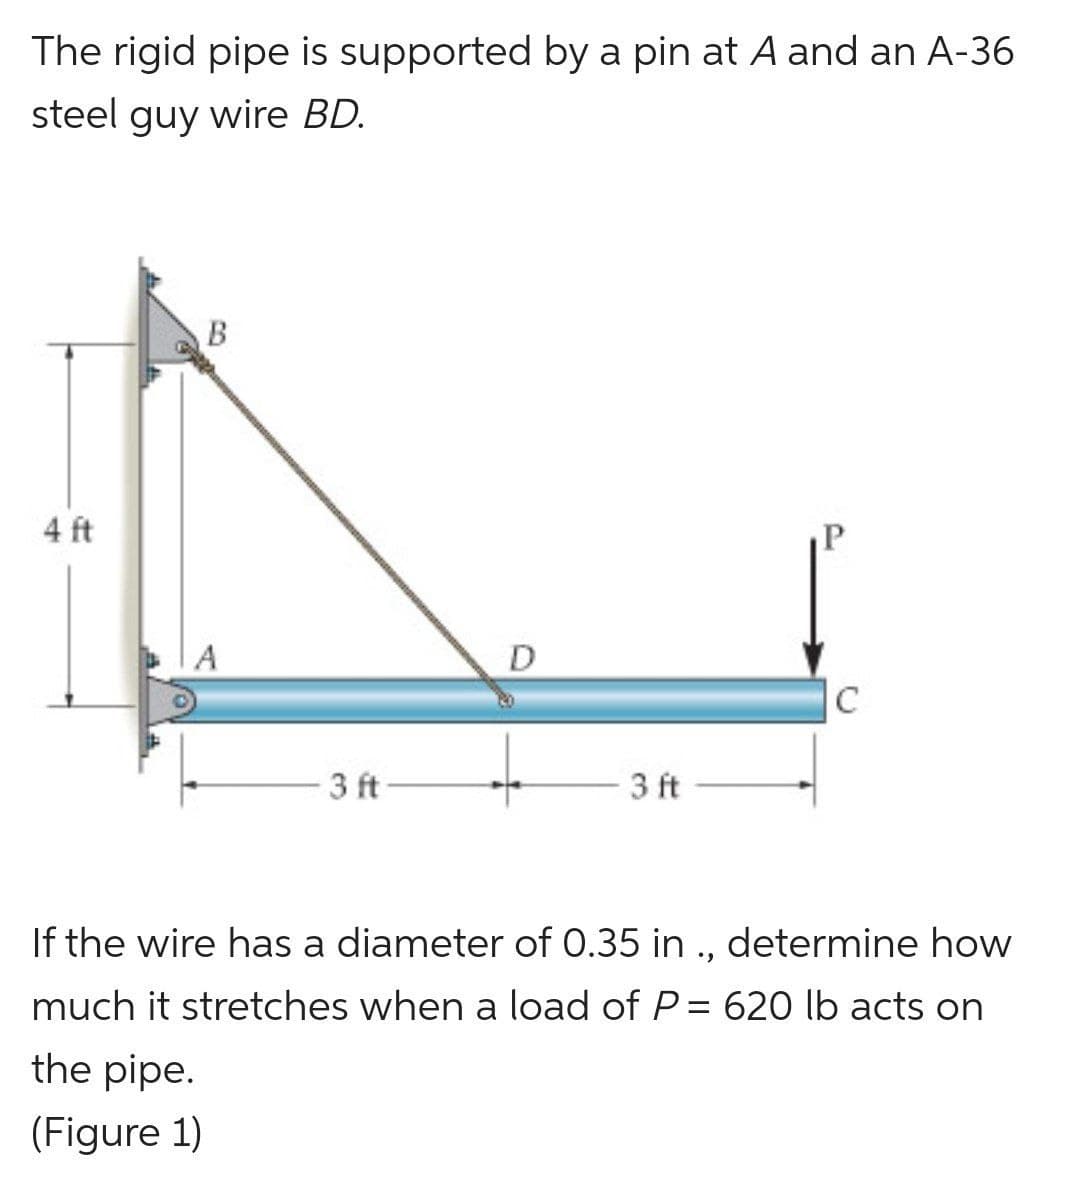 The rigid pipe is supported by a pin at A and an A-36
steel guy wire BD.
4 ft
B
3 ft
D
3 ft
P
C
If the wire has a diameter of 0.35 in ., determine how
much it stretches when a load of P = 620 lb acts on
the pipe.
(Figure 1)